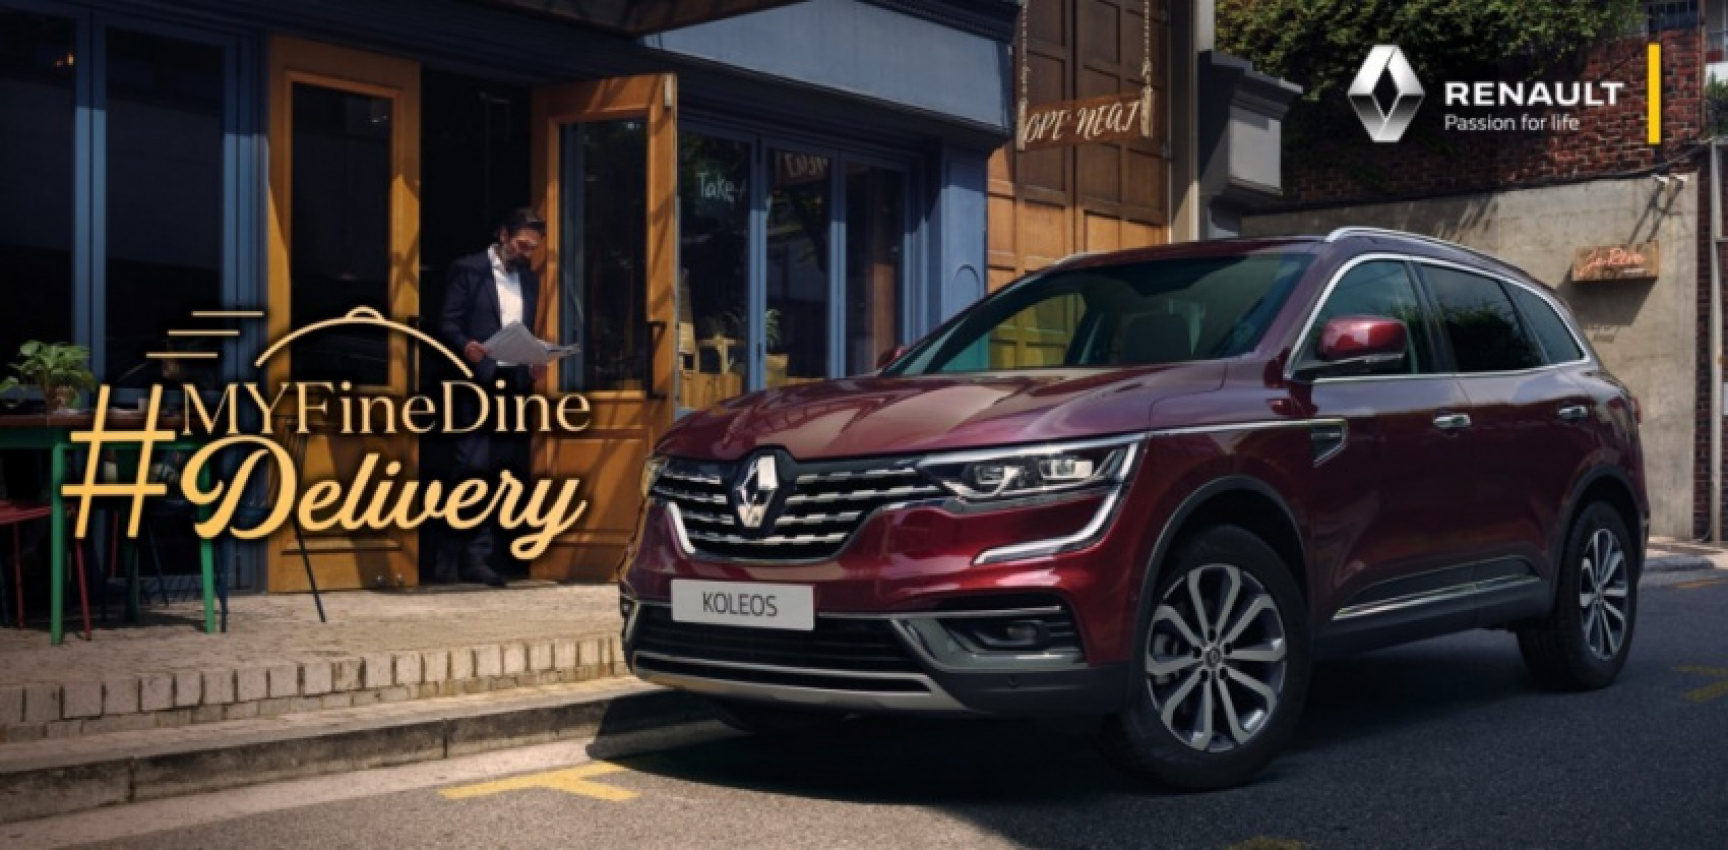 autos, cars, renault, autos renault, renault treats four lucky winners to a meal delivered by their favourite celebrity in a koleos